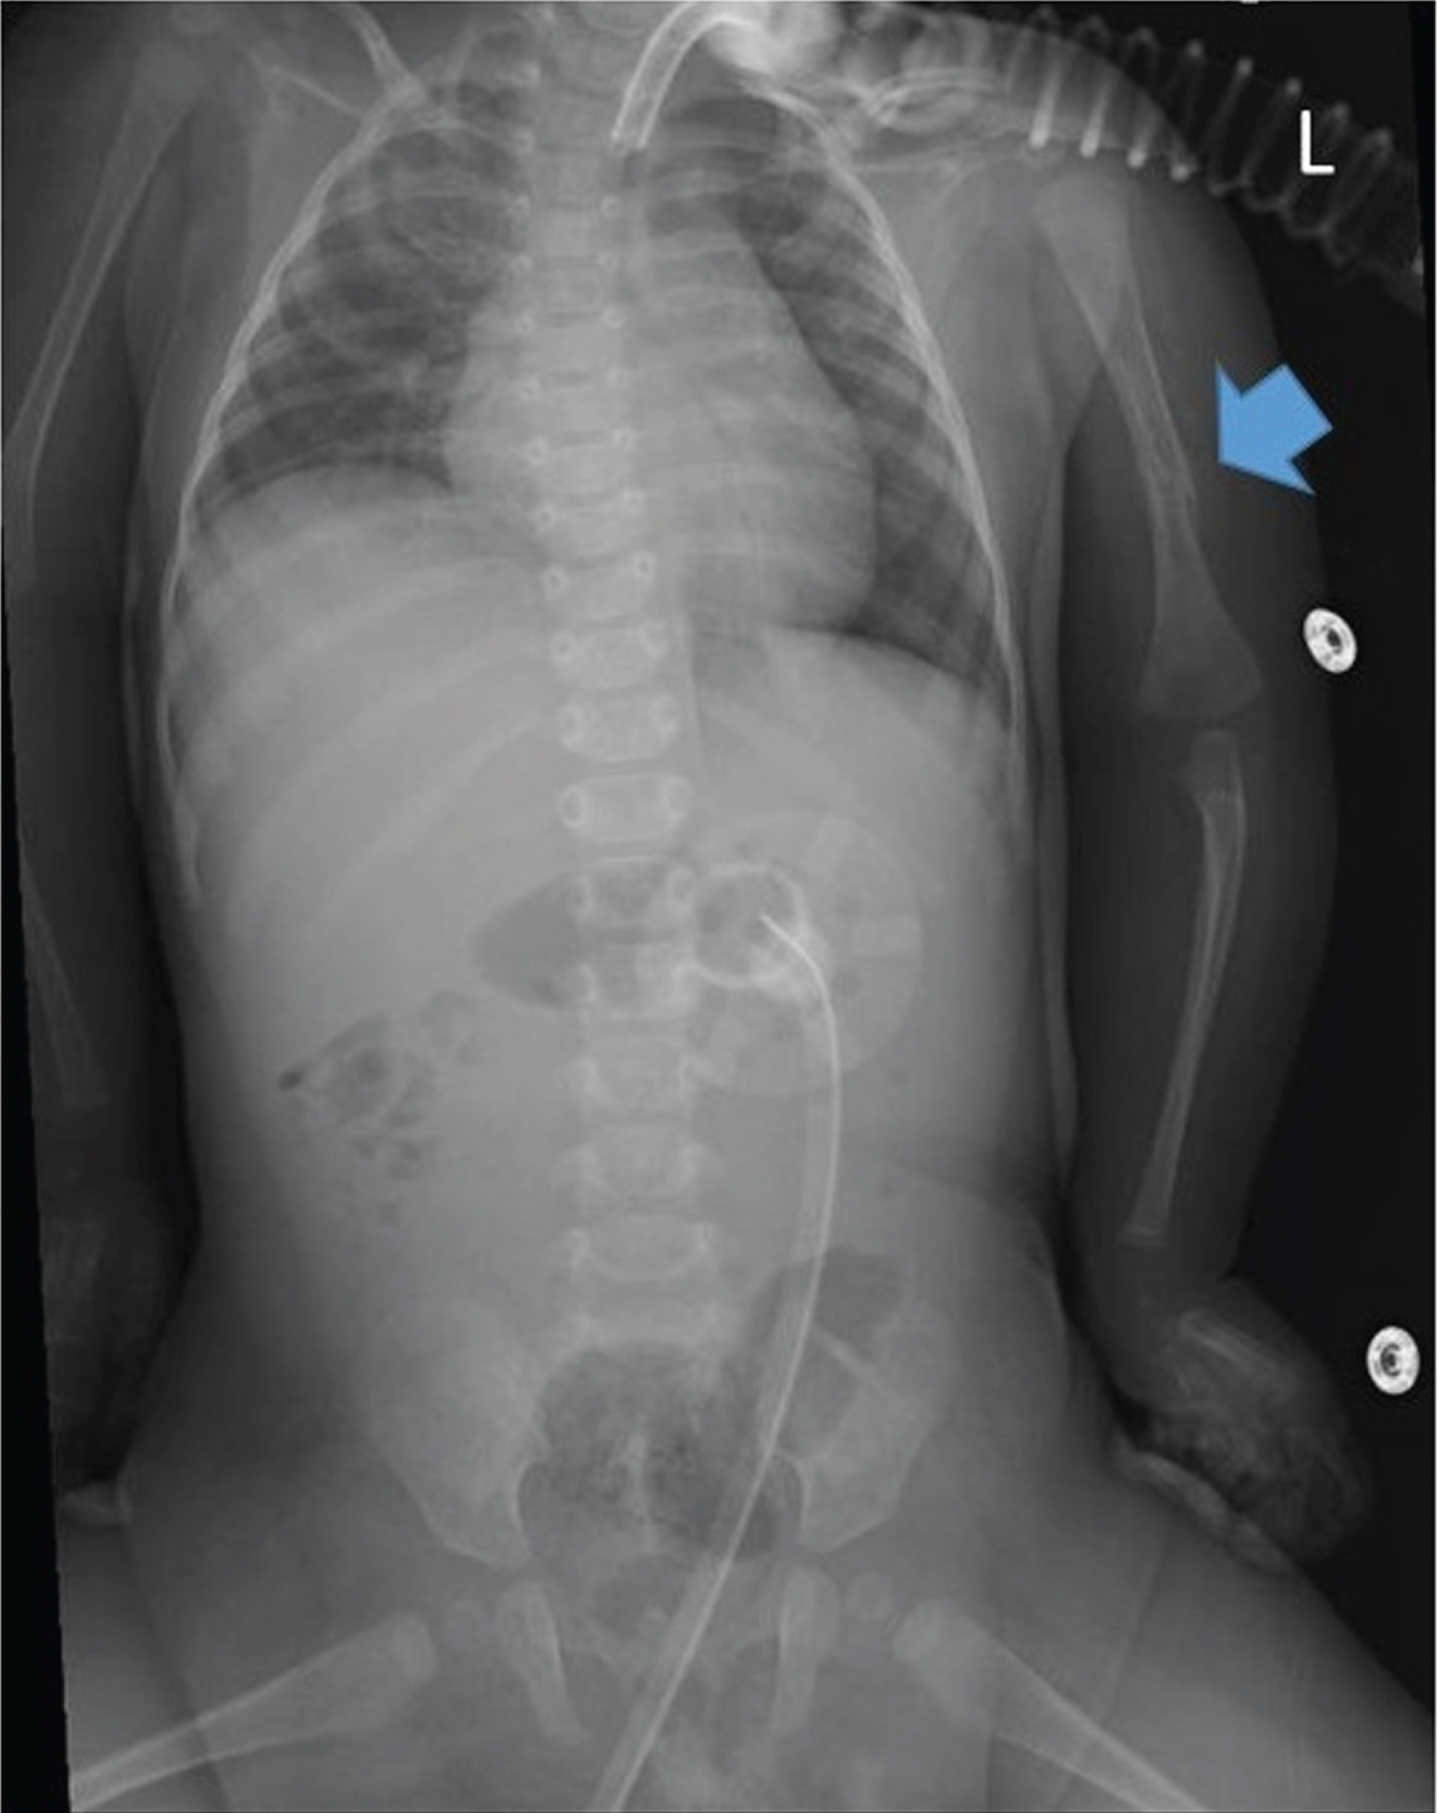 Chest X-ray of patient #1 at 3 months of life showing a diaphyseal fracture on the left humerus, with signs of bone callus apposition (blue arrow). L = left.